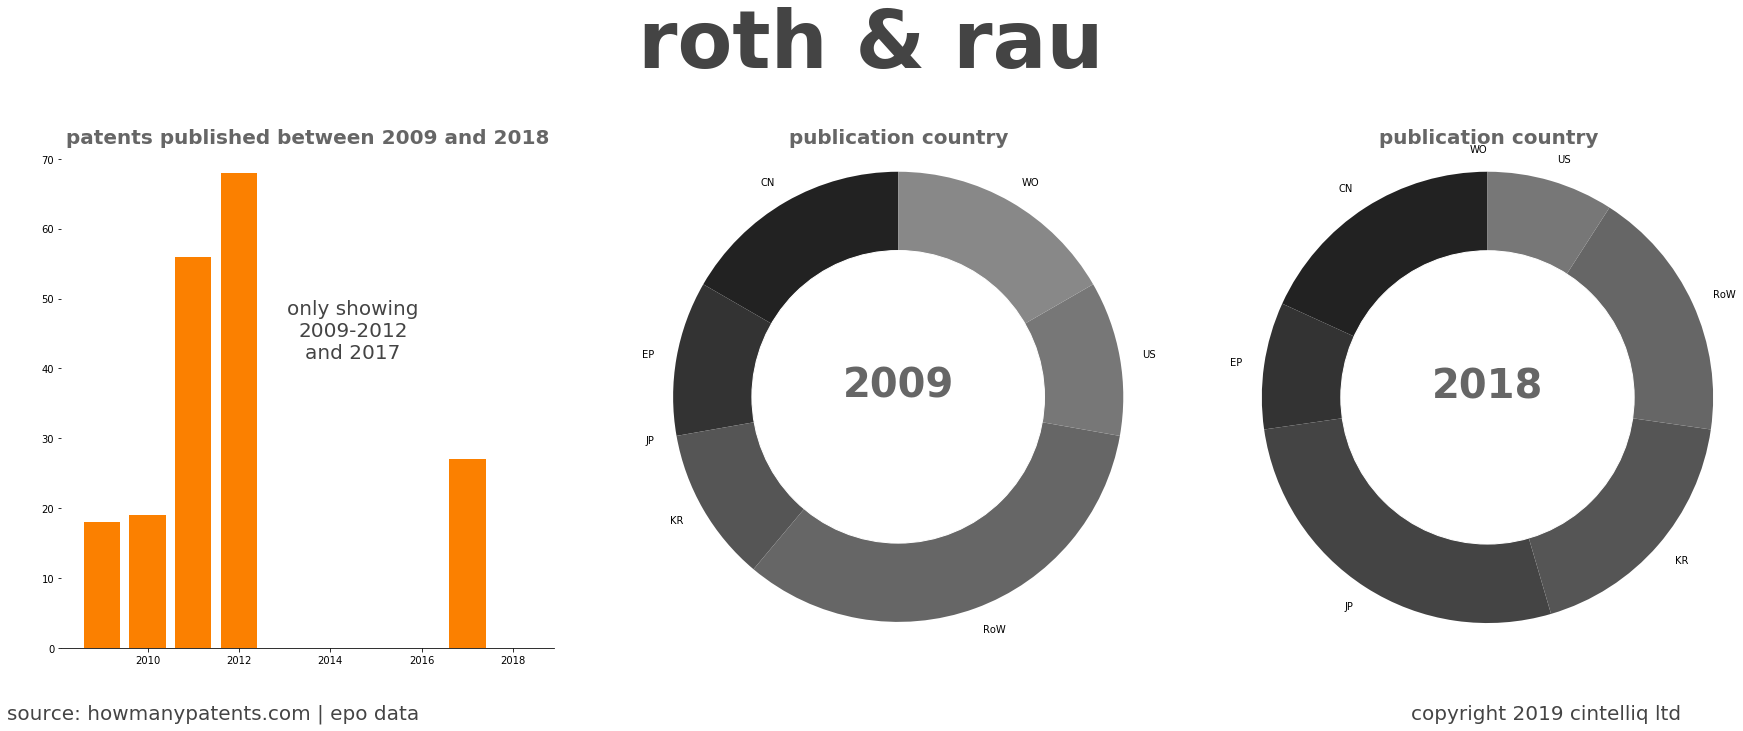 summary of patents for Roth & Rau